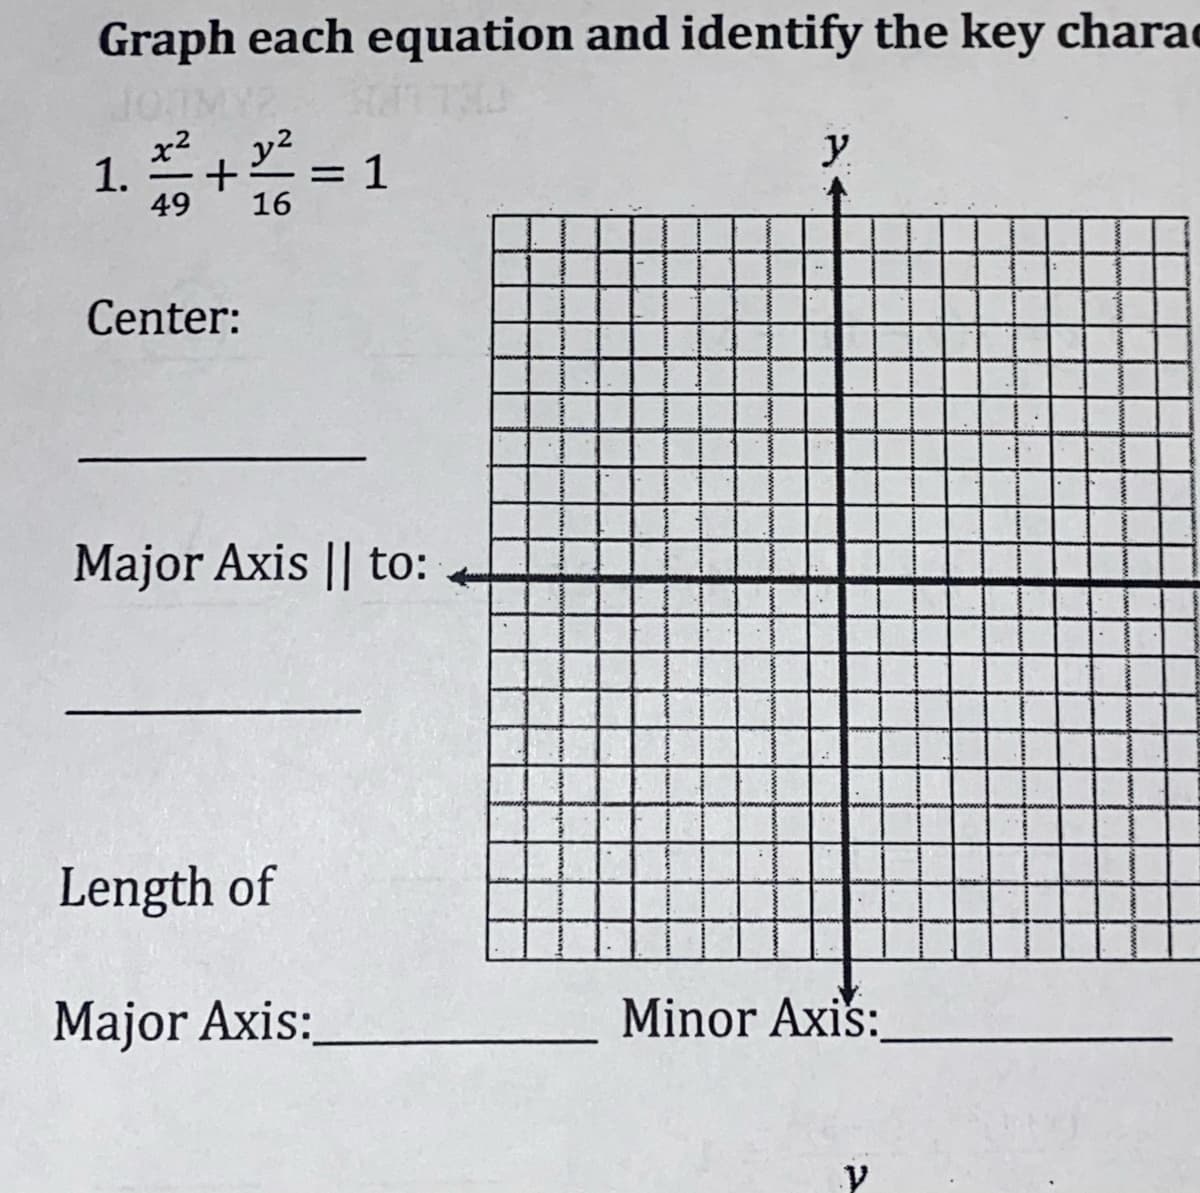 Graph each equation and identify the key charac
1.+ = 1
y
49
Center:
Major Axis || to:
Length of
Major Axis:
Minor Axis:
